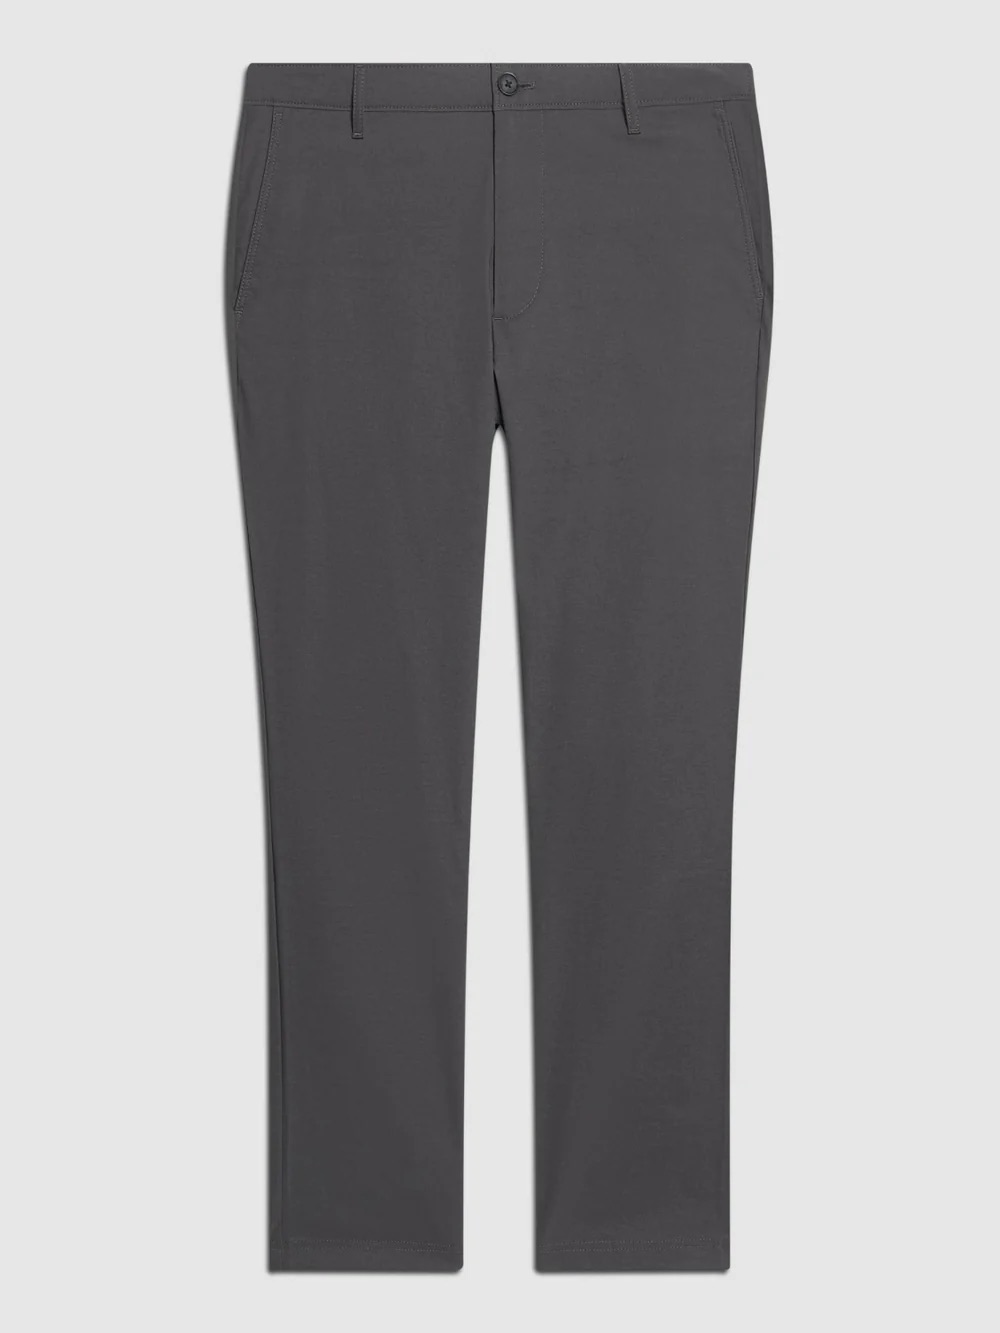 Review: These Ben Sherman pants might be the only pair I’ll even buy ...